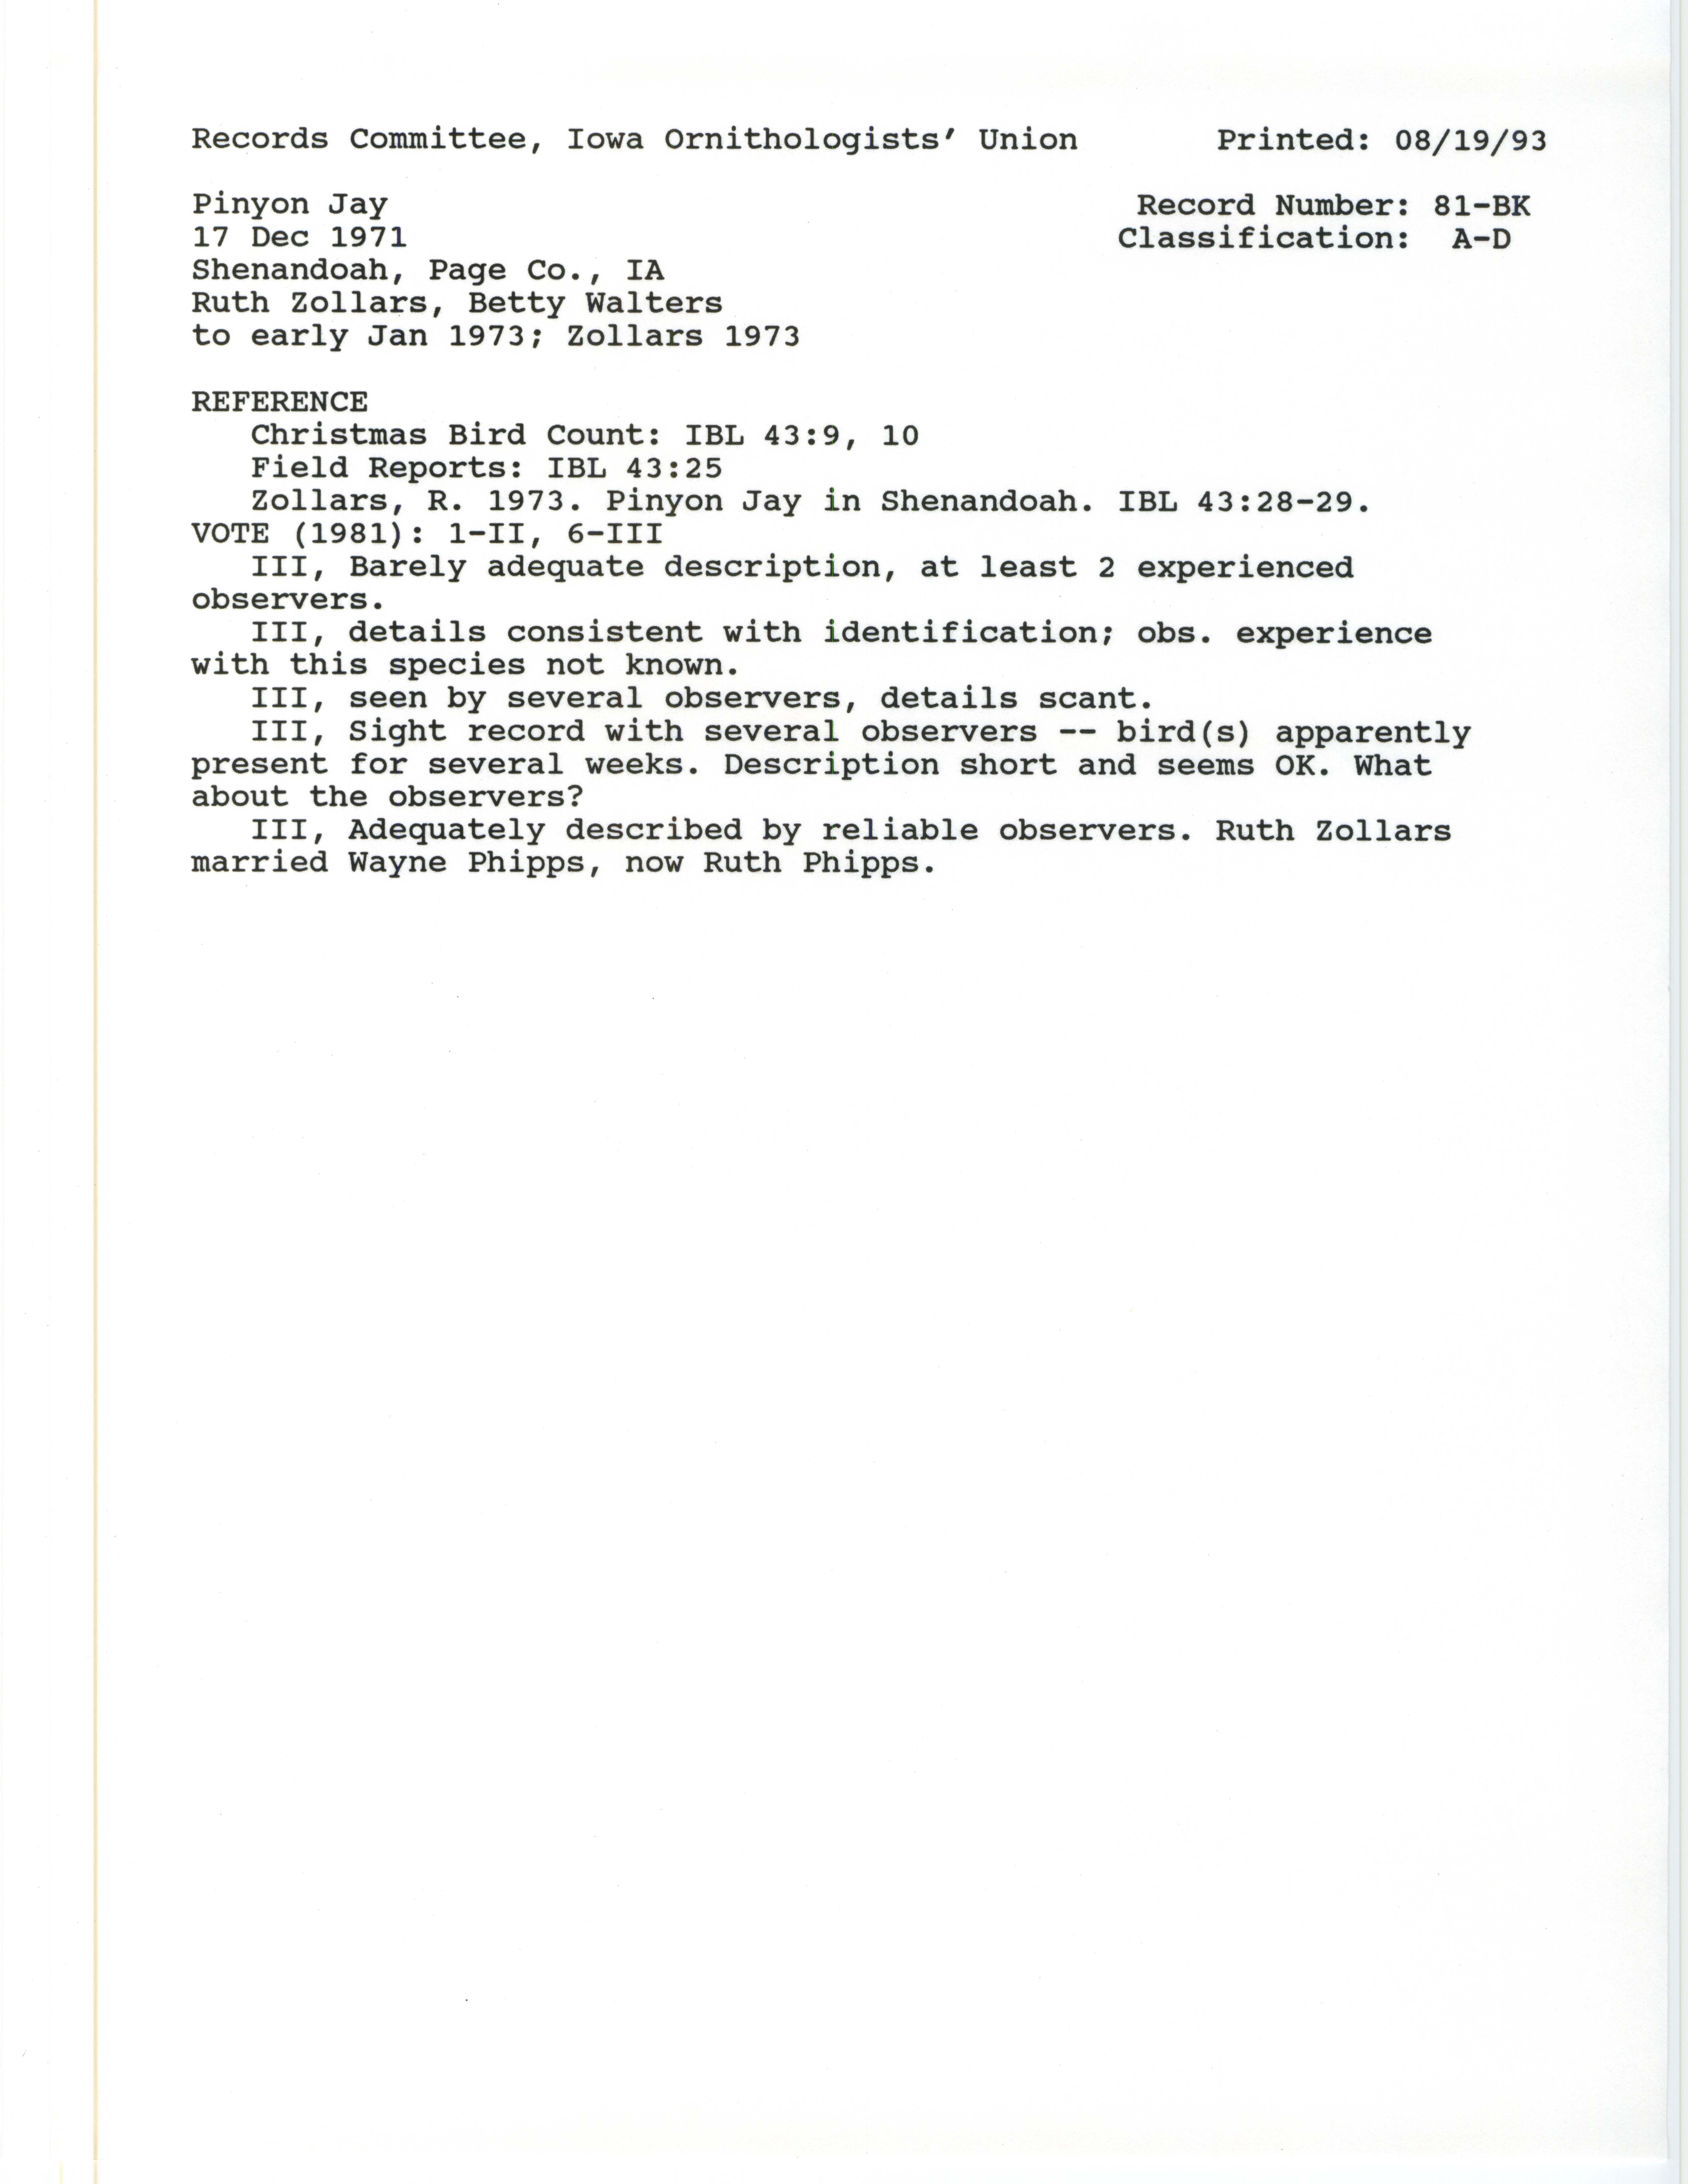 Records Committee review for rare bird sighting for Pinyon Jay at Shenandoah in 1972